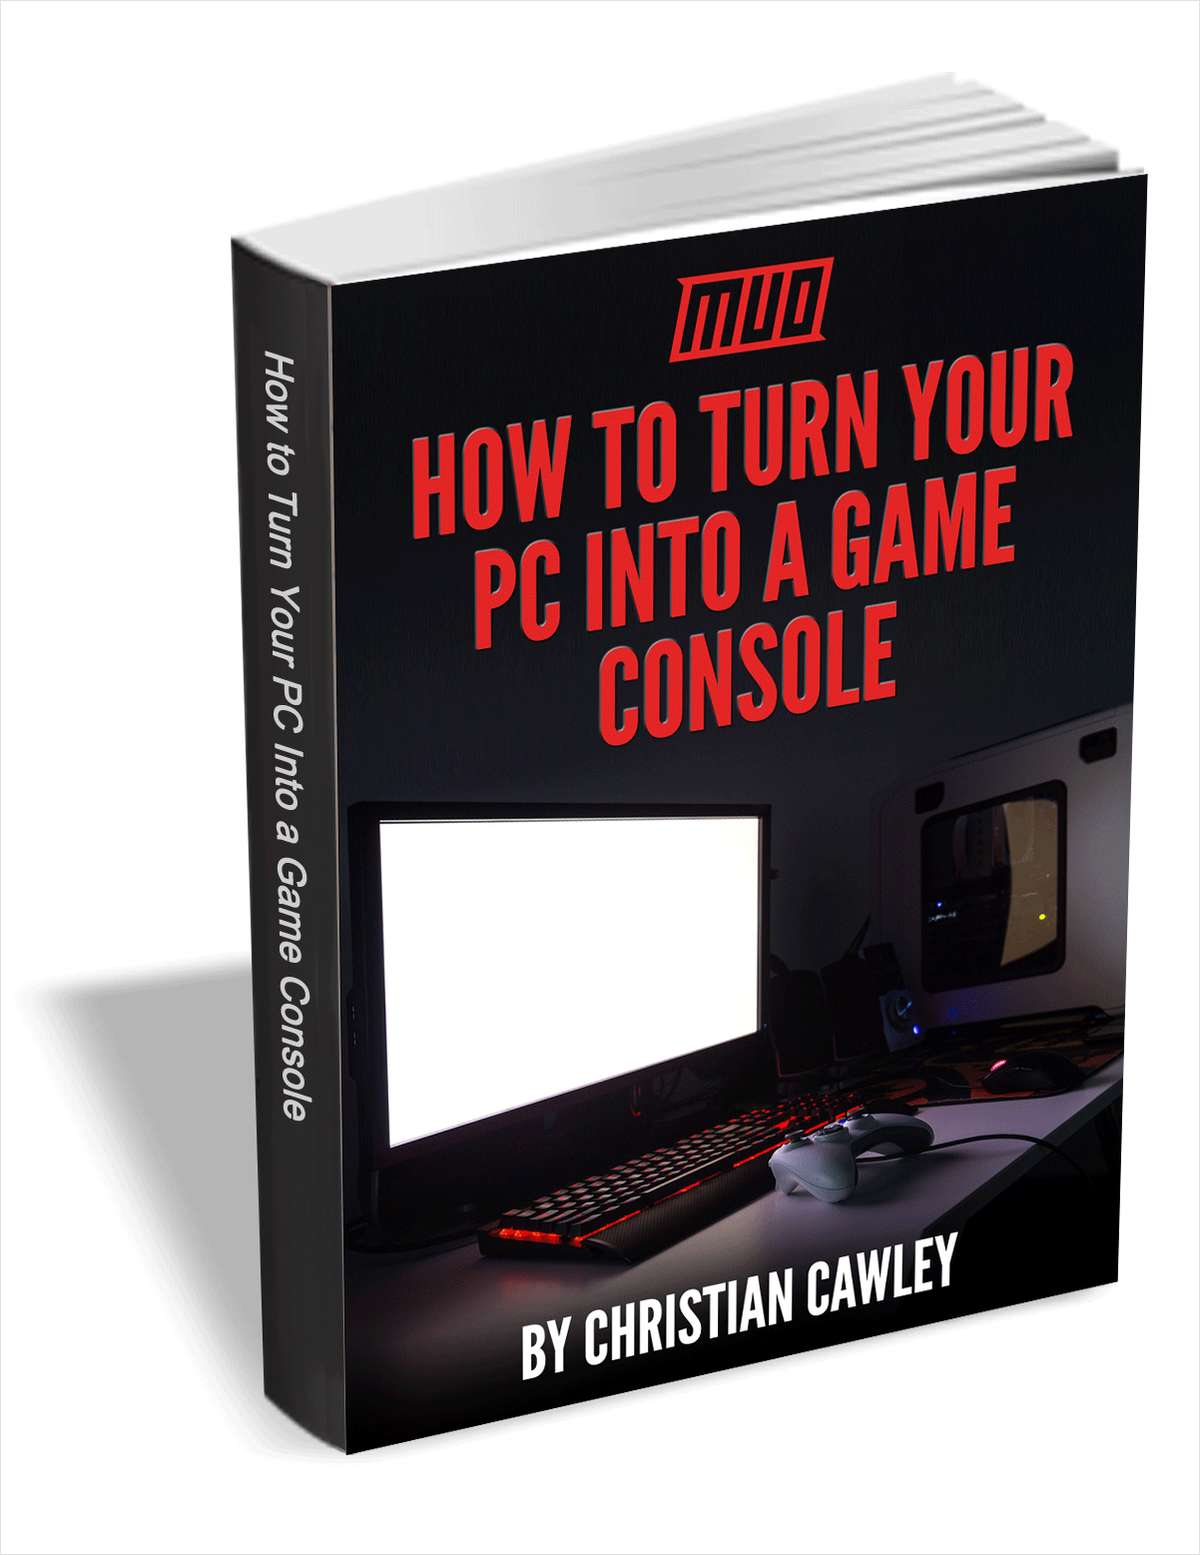 How to Turn Your PC Into a Game Console